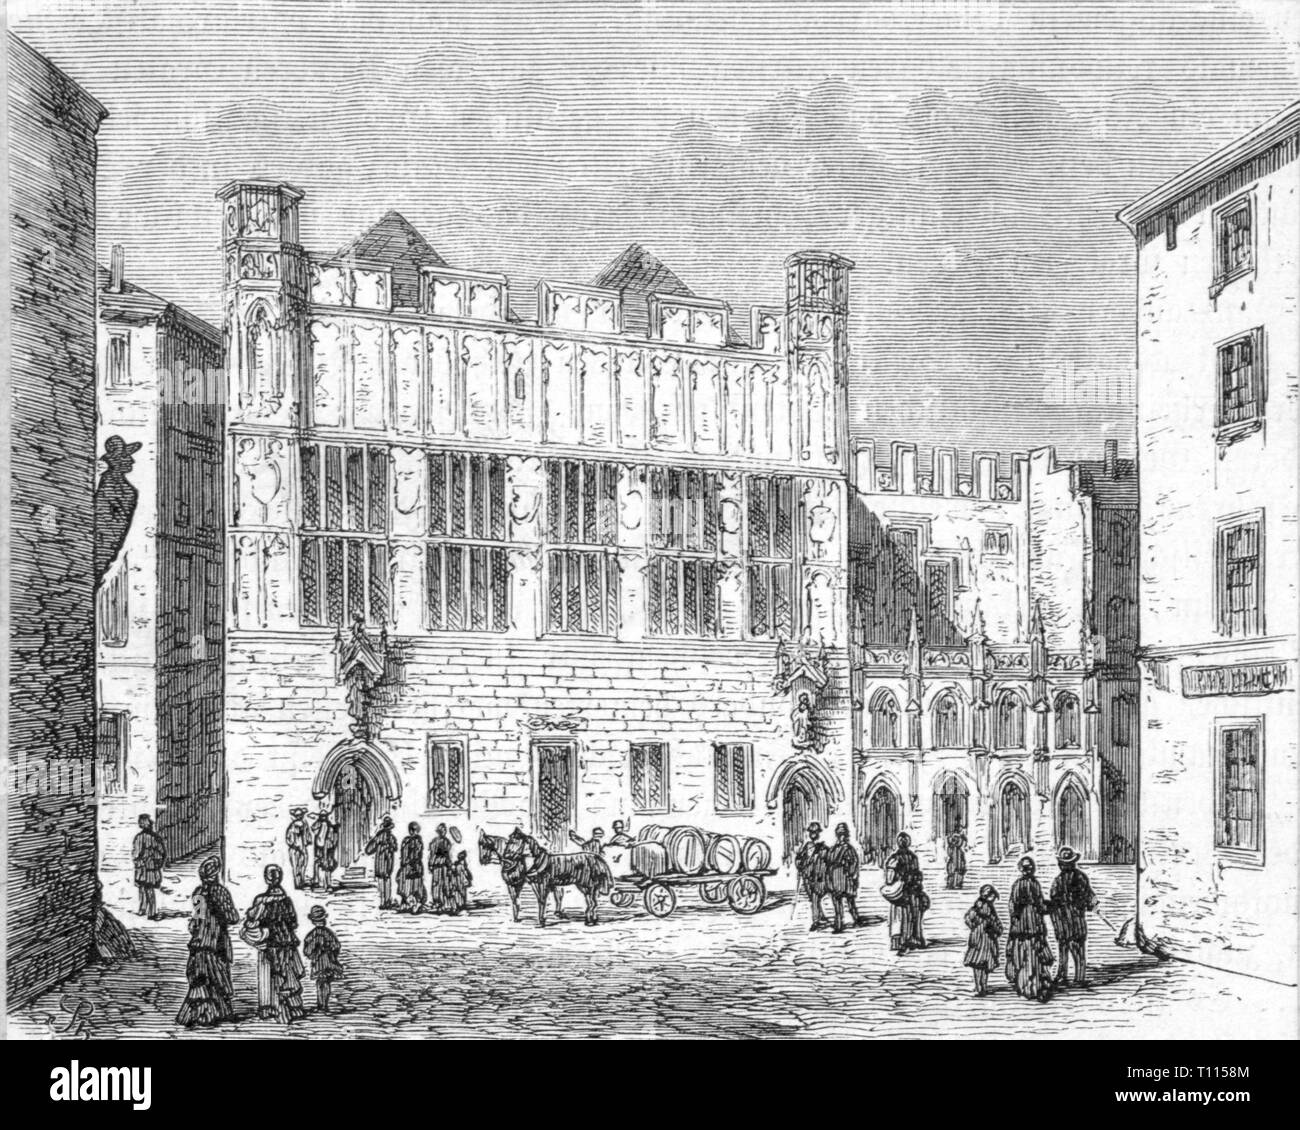 Germany, cities and communities, Cologne, building, House Guerzenich, exterior view, wood engraving, 19th century city, people, houses, street, streets, lane, lanes, cart, carts, horse-drawn vehicle, transport, transportation, Rhineland, North Rhine-Westphalia, Kingdom of Prussia, Rhine Province, German Empire, Imperial Era, Europe, building, buildings, historic, historical, Gurzenich, Gürzenich, Artist's Copyright has not to be cleared Stock Photo